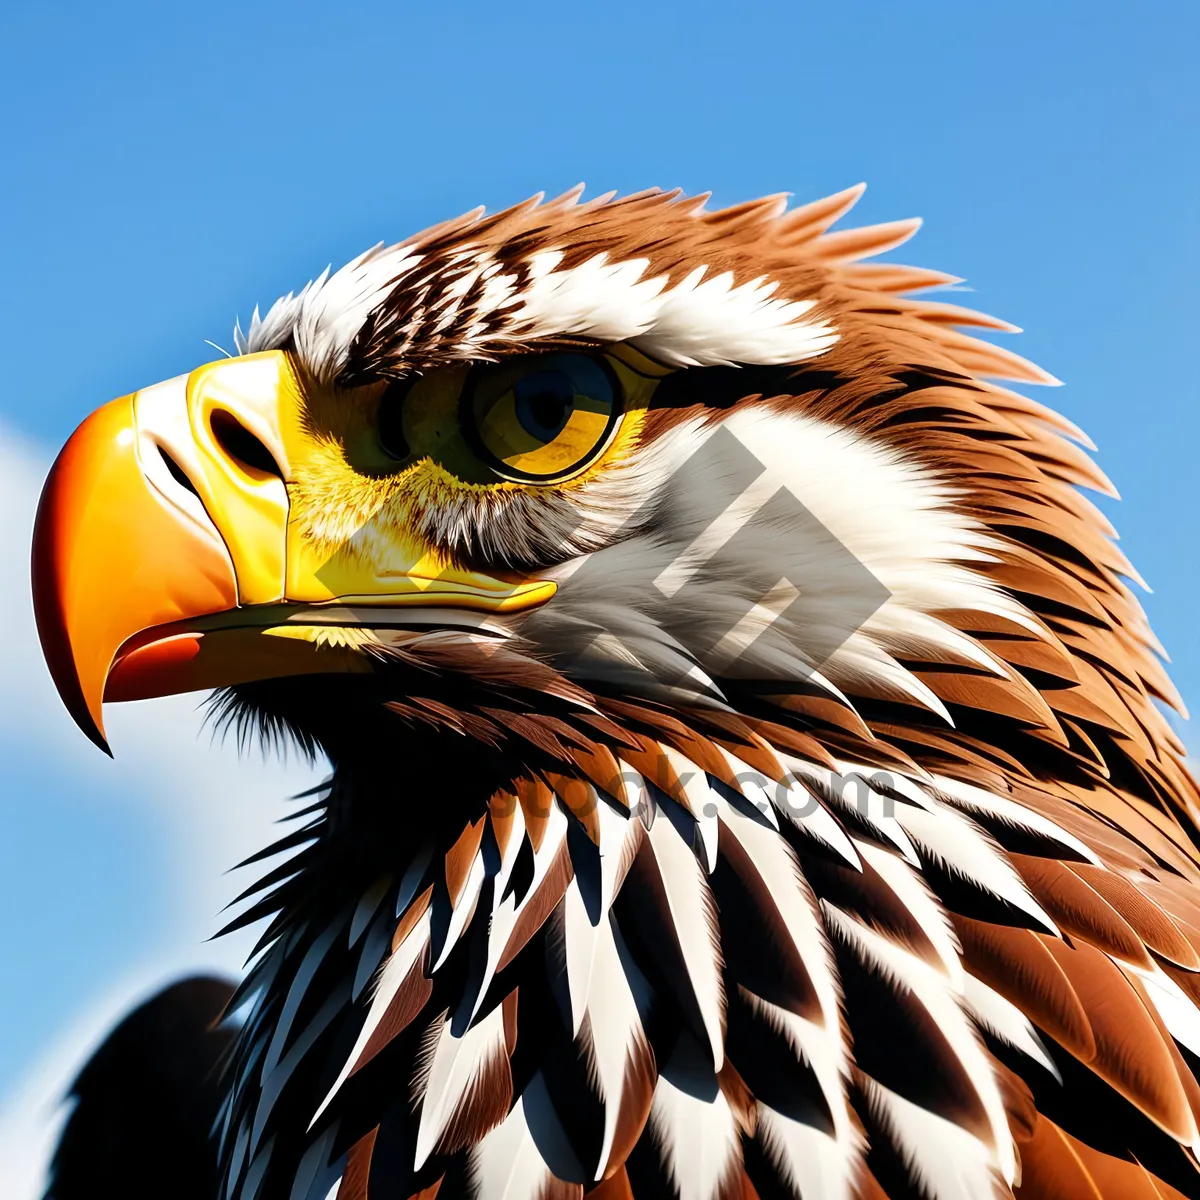 Picture of Raptor Gaze: Majestic Bald Eagle with Piercing Yellow Eyes